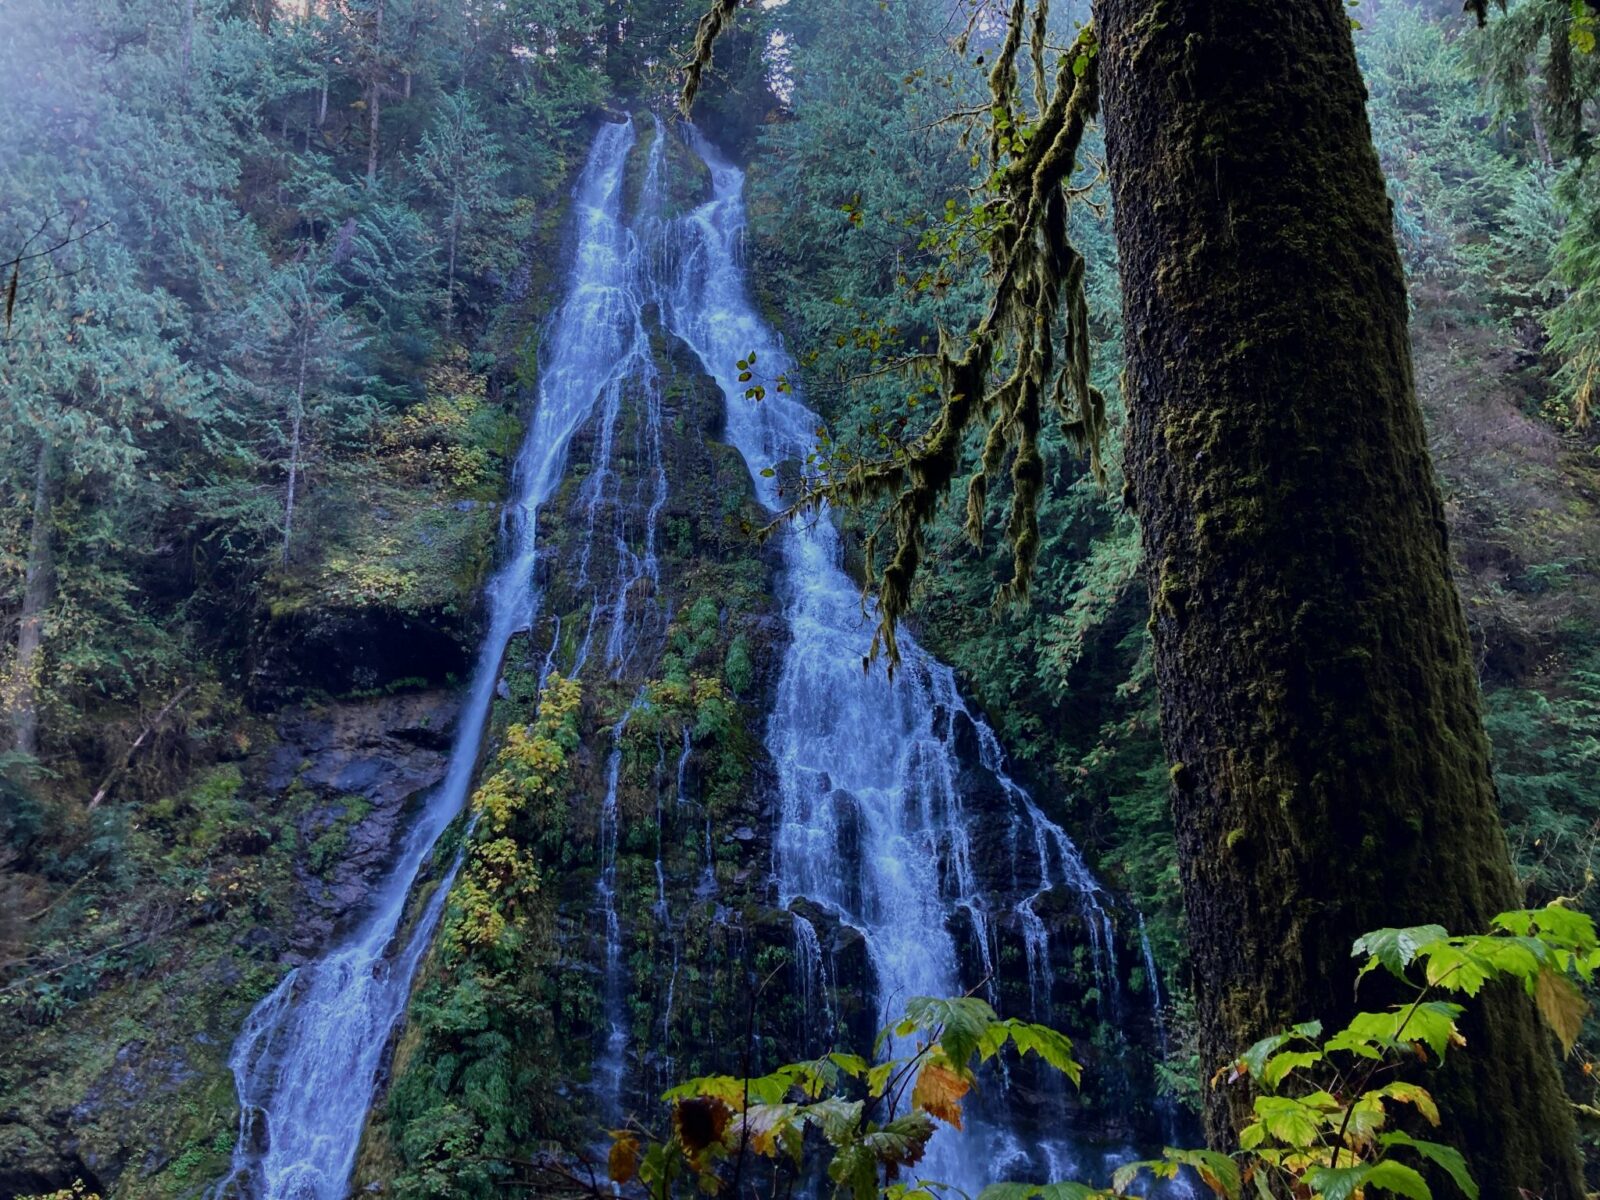 Two sides of a high waterfall coming over a moss and fern covered cliff through the forest into the Boulder River